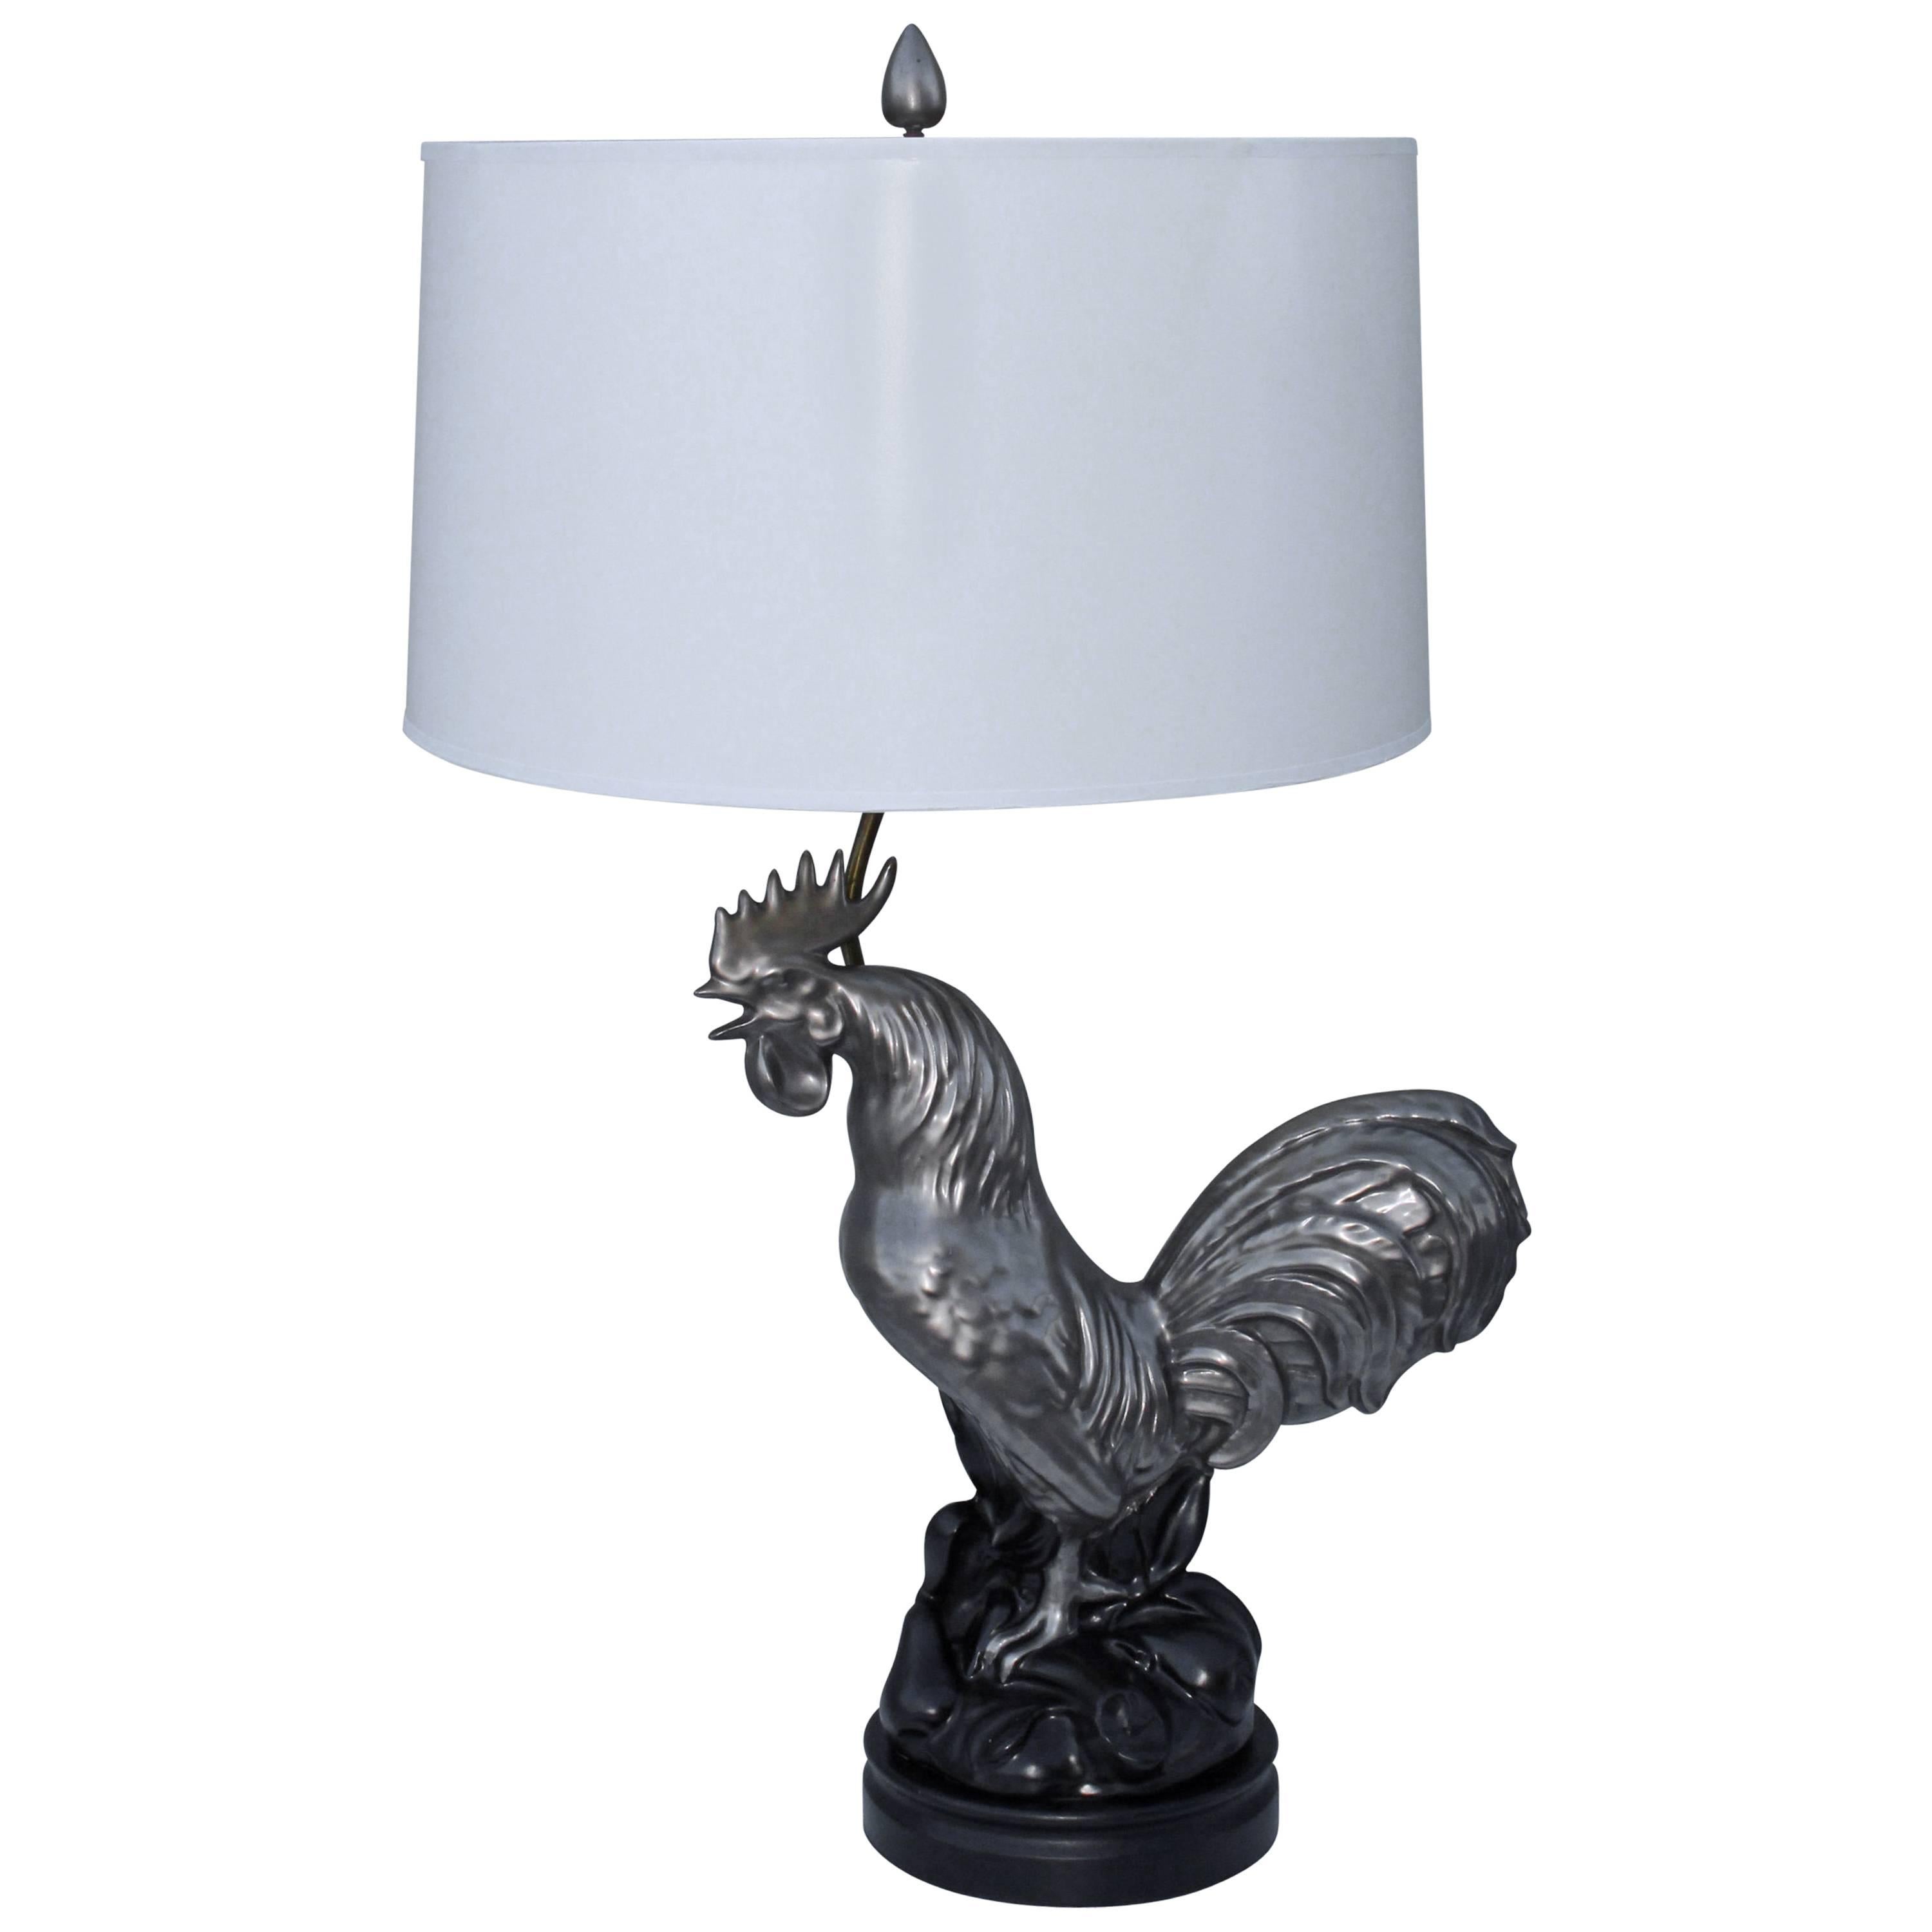 1950s Ceramic Rooster Table Lamp